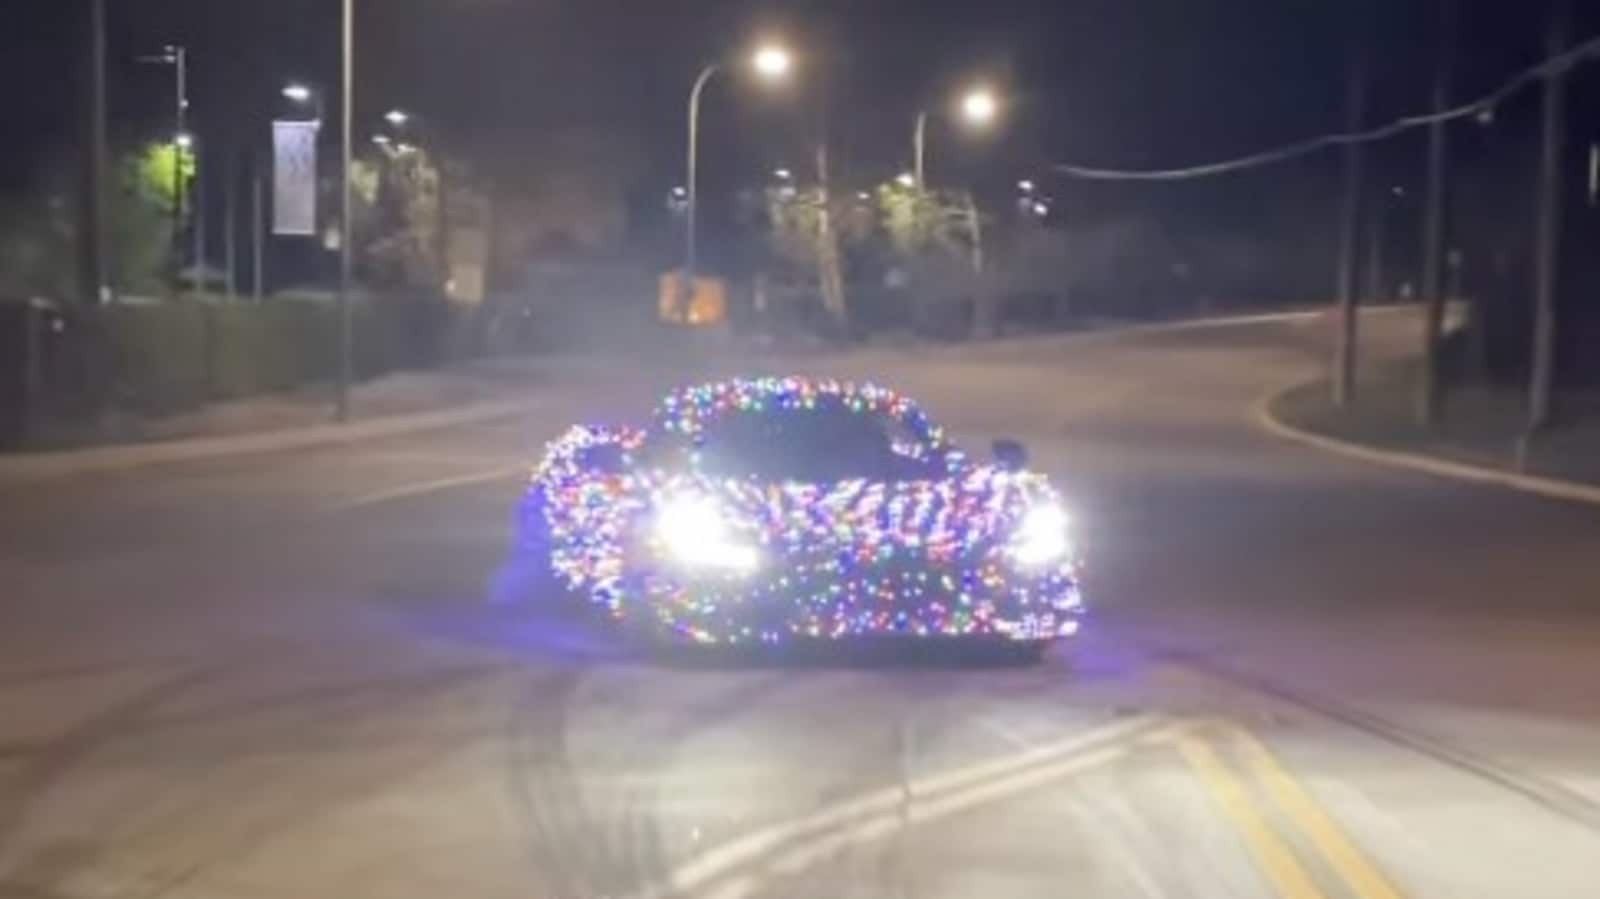 Watch: This drifting McLaren 720S wrapped in Christmas lights is a unique sight